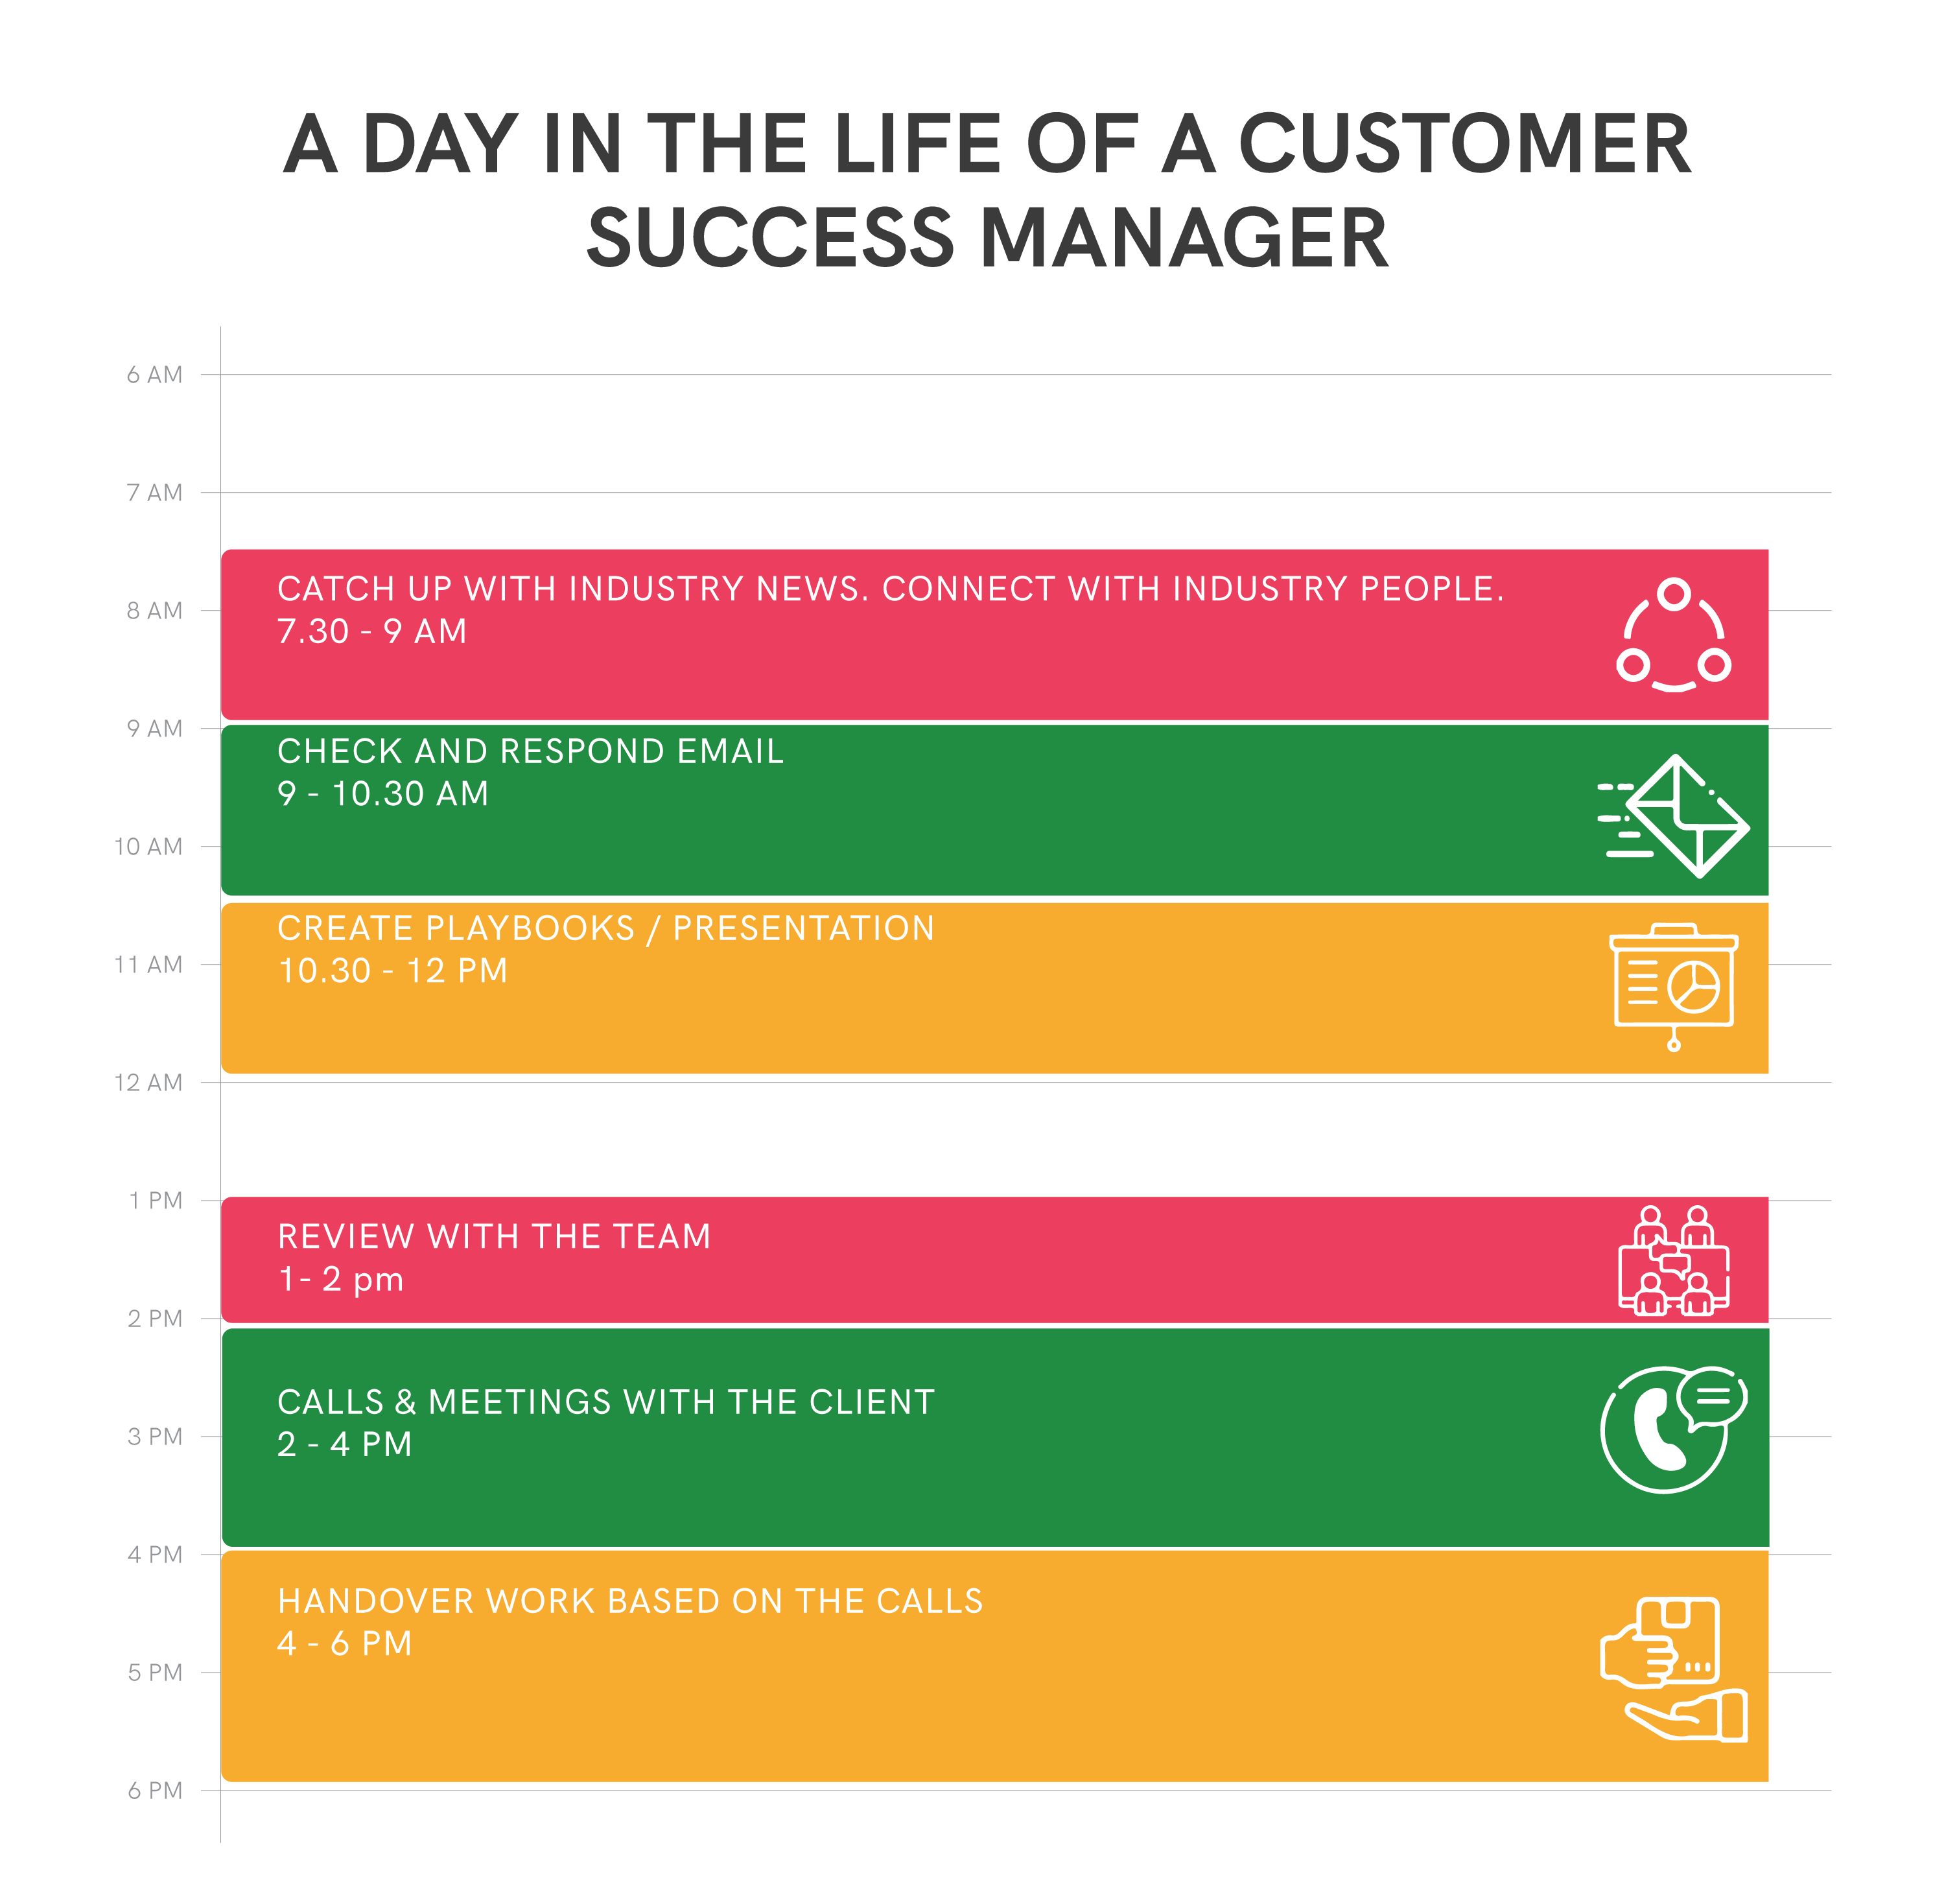 A google calendar showing a day in the life of a customer success manager